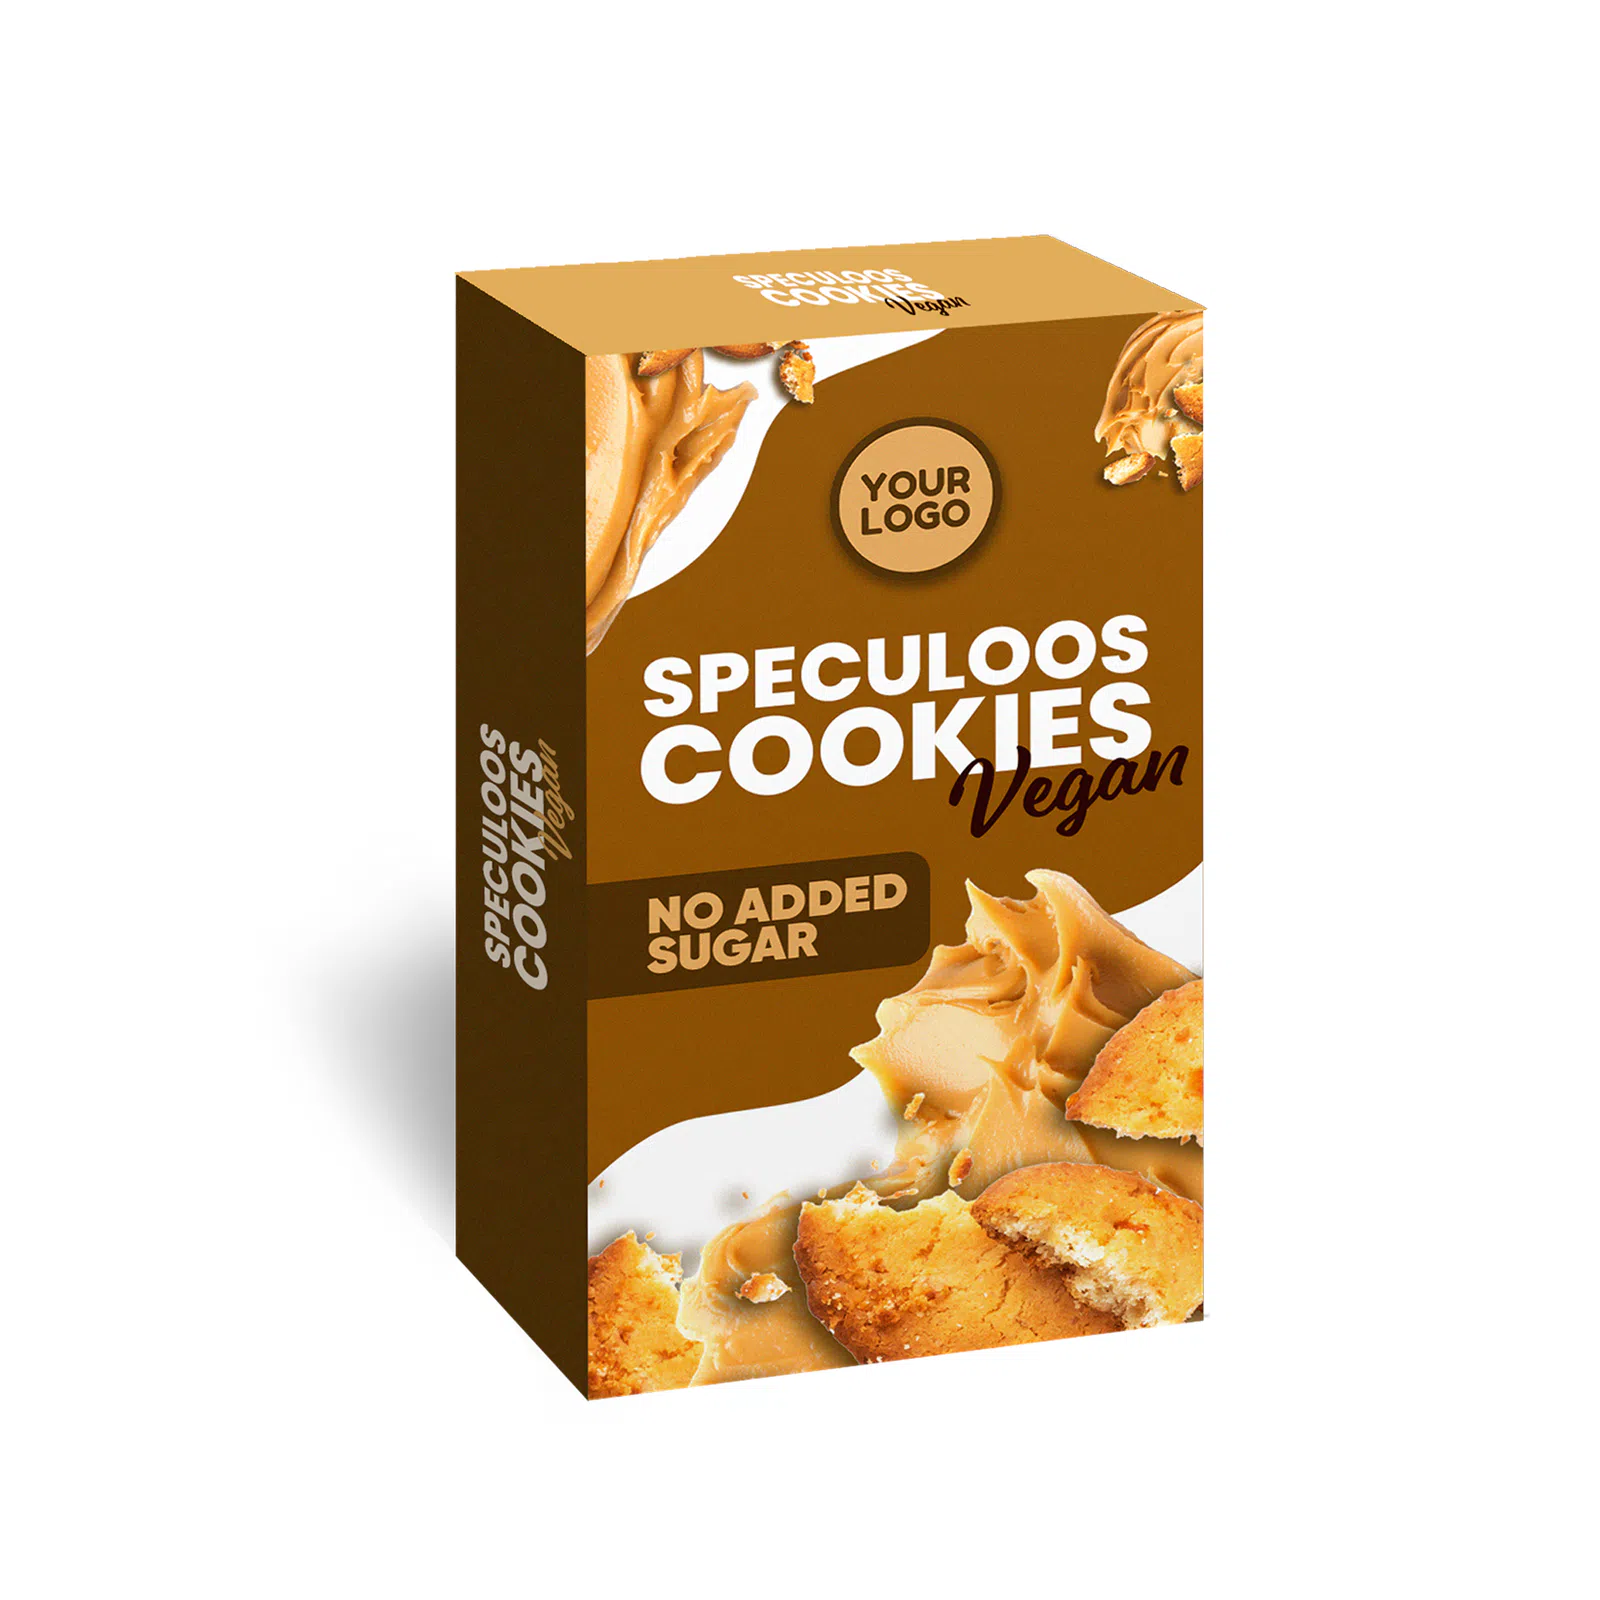 Private label amerpharma speculoos cookies without sugar for vegans in fully printed box